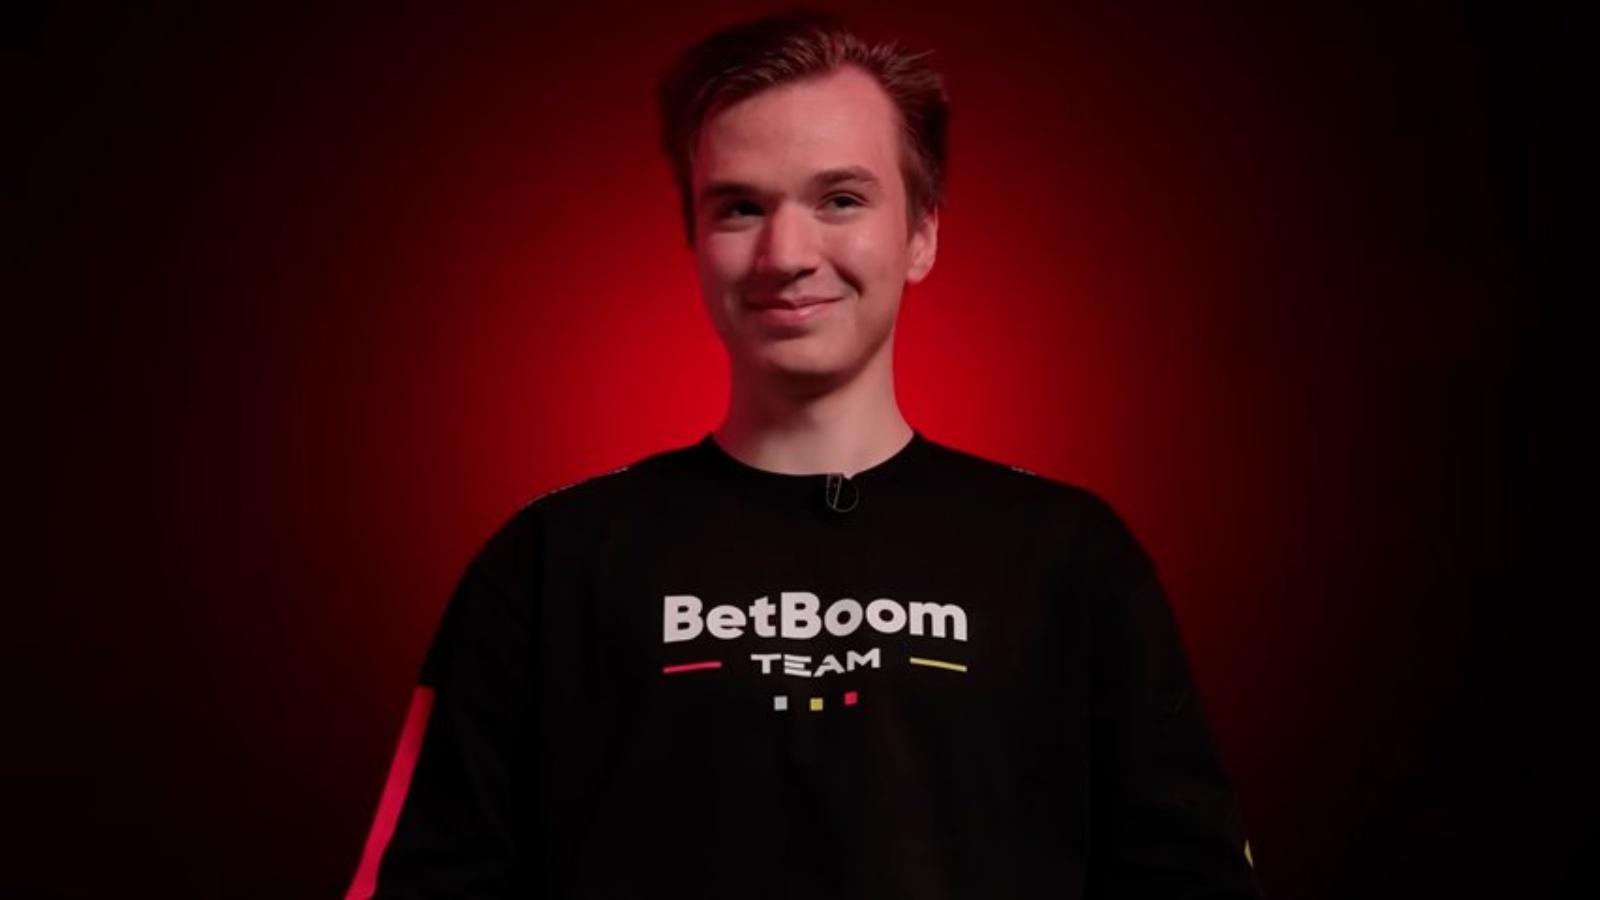 BetBoom player disqualified from Dota 2 Bali Major after watching Twitch  stream during match - Dexerto